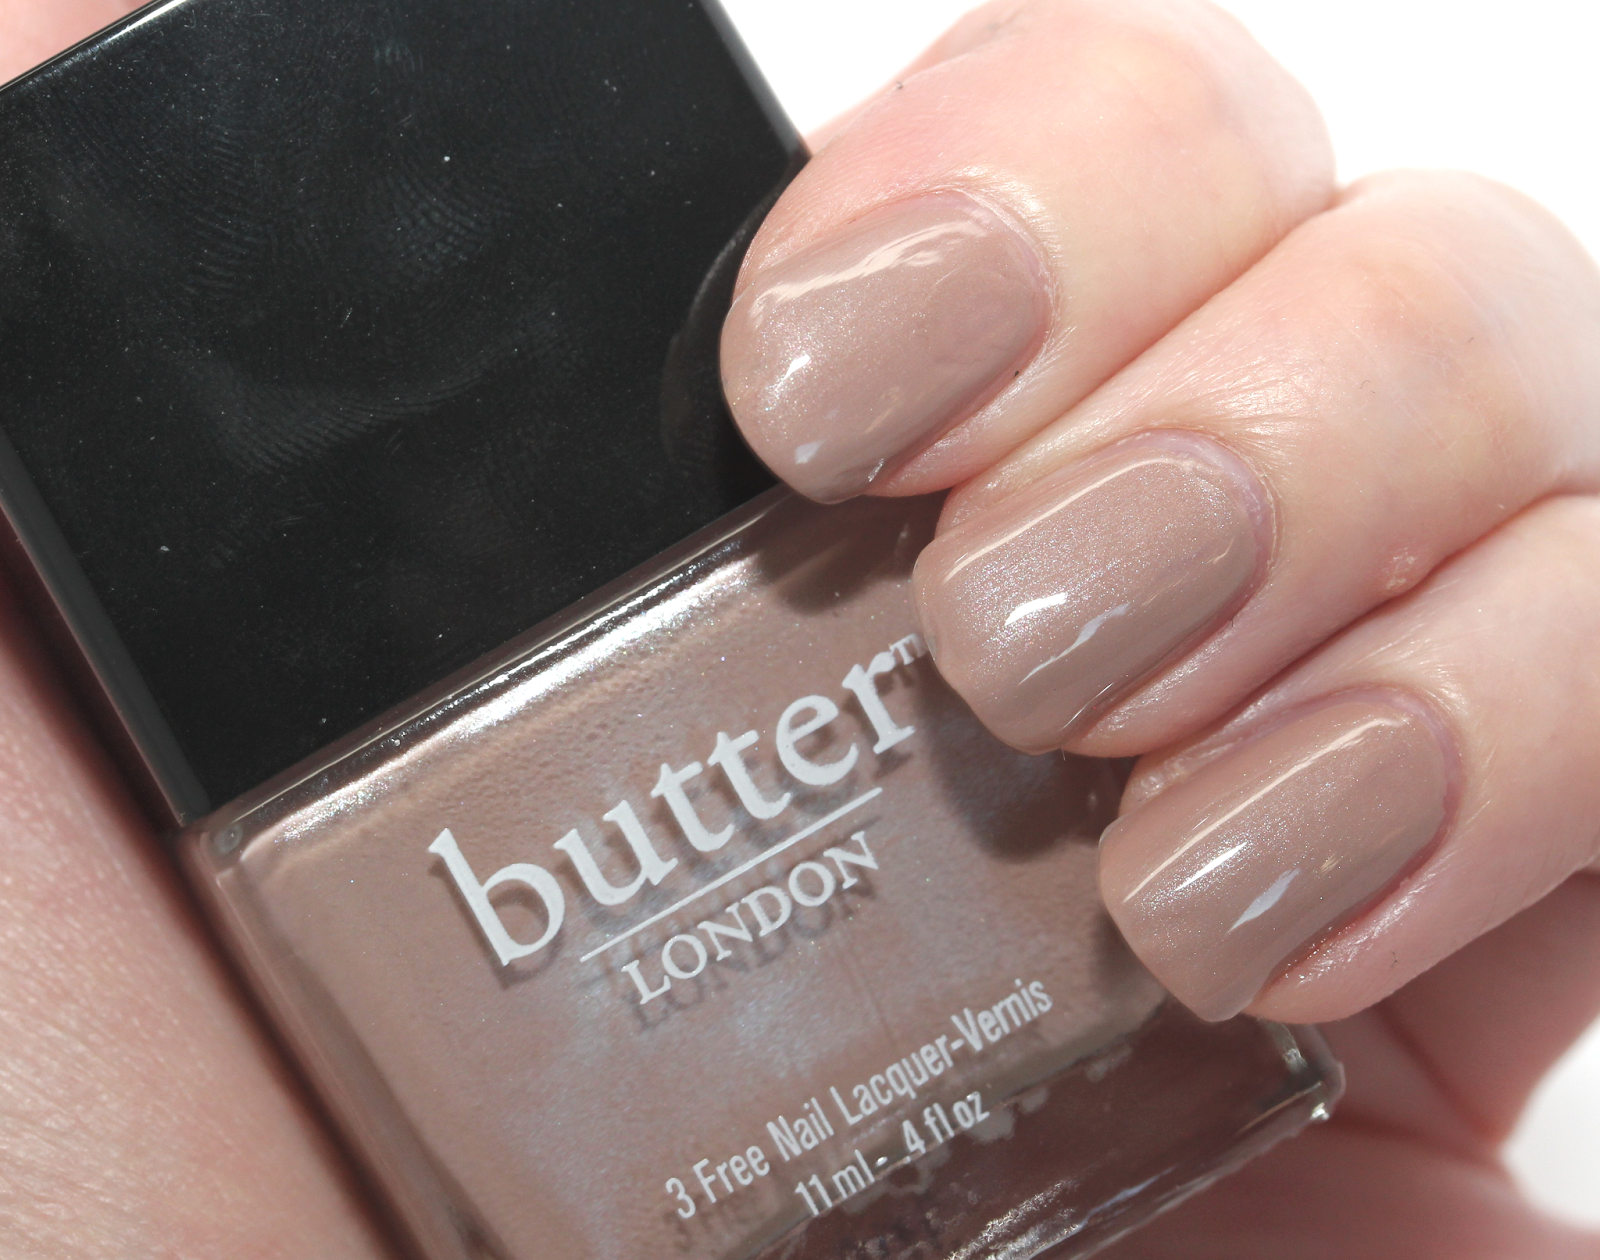 6. Butter London Nail Lacquer in "Fruit Machine" - wide 1